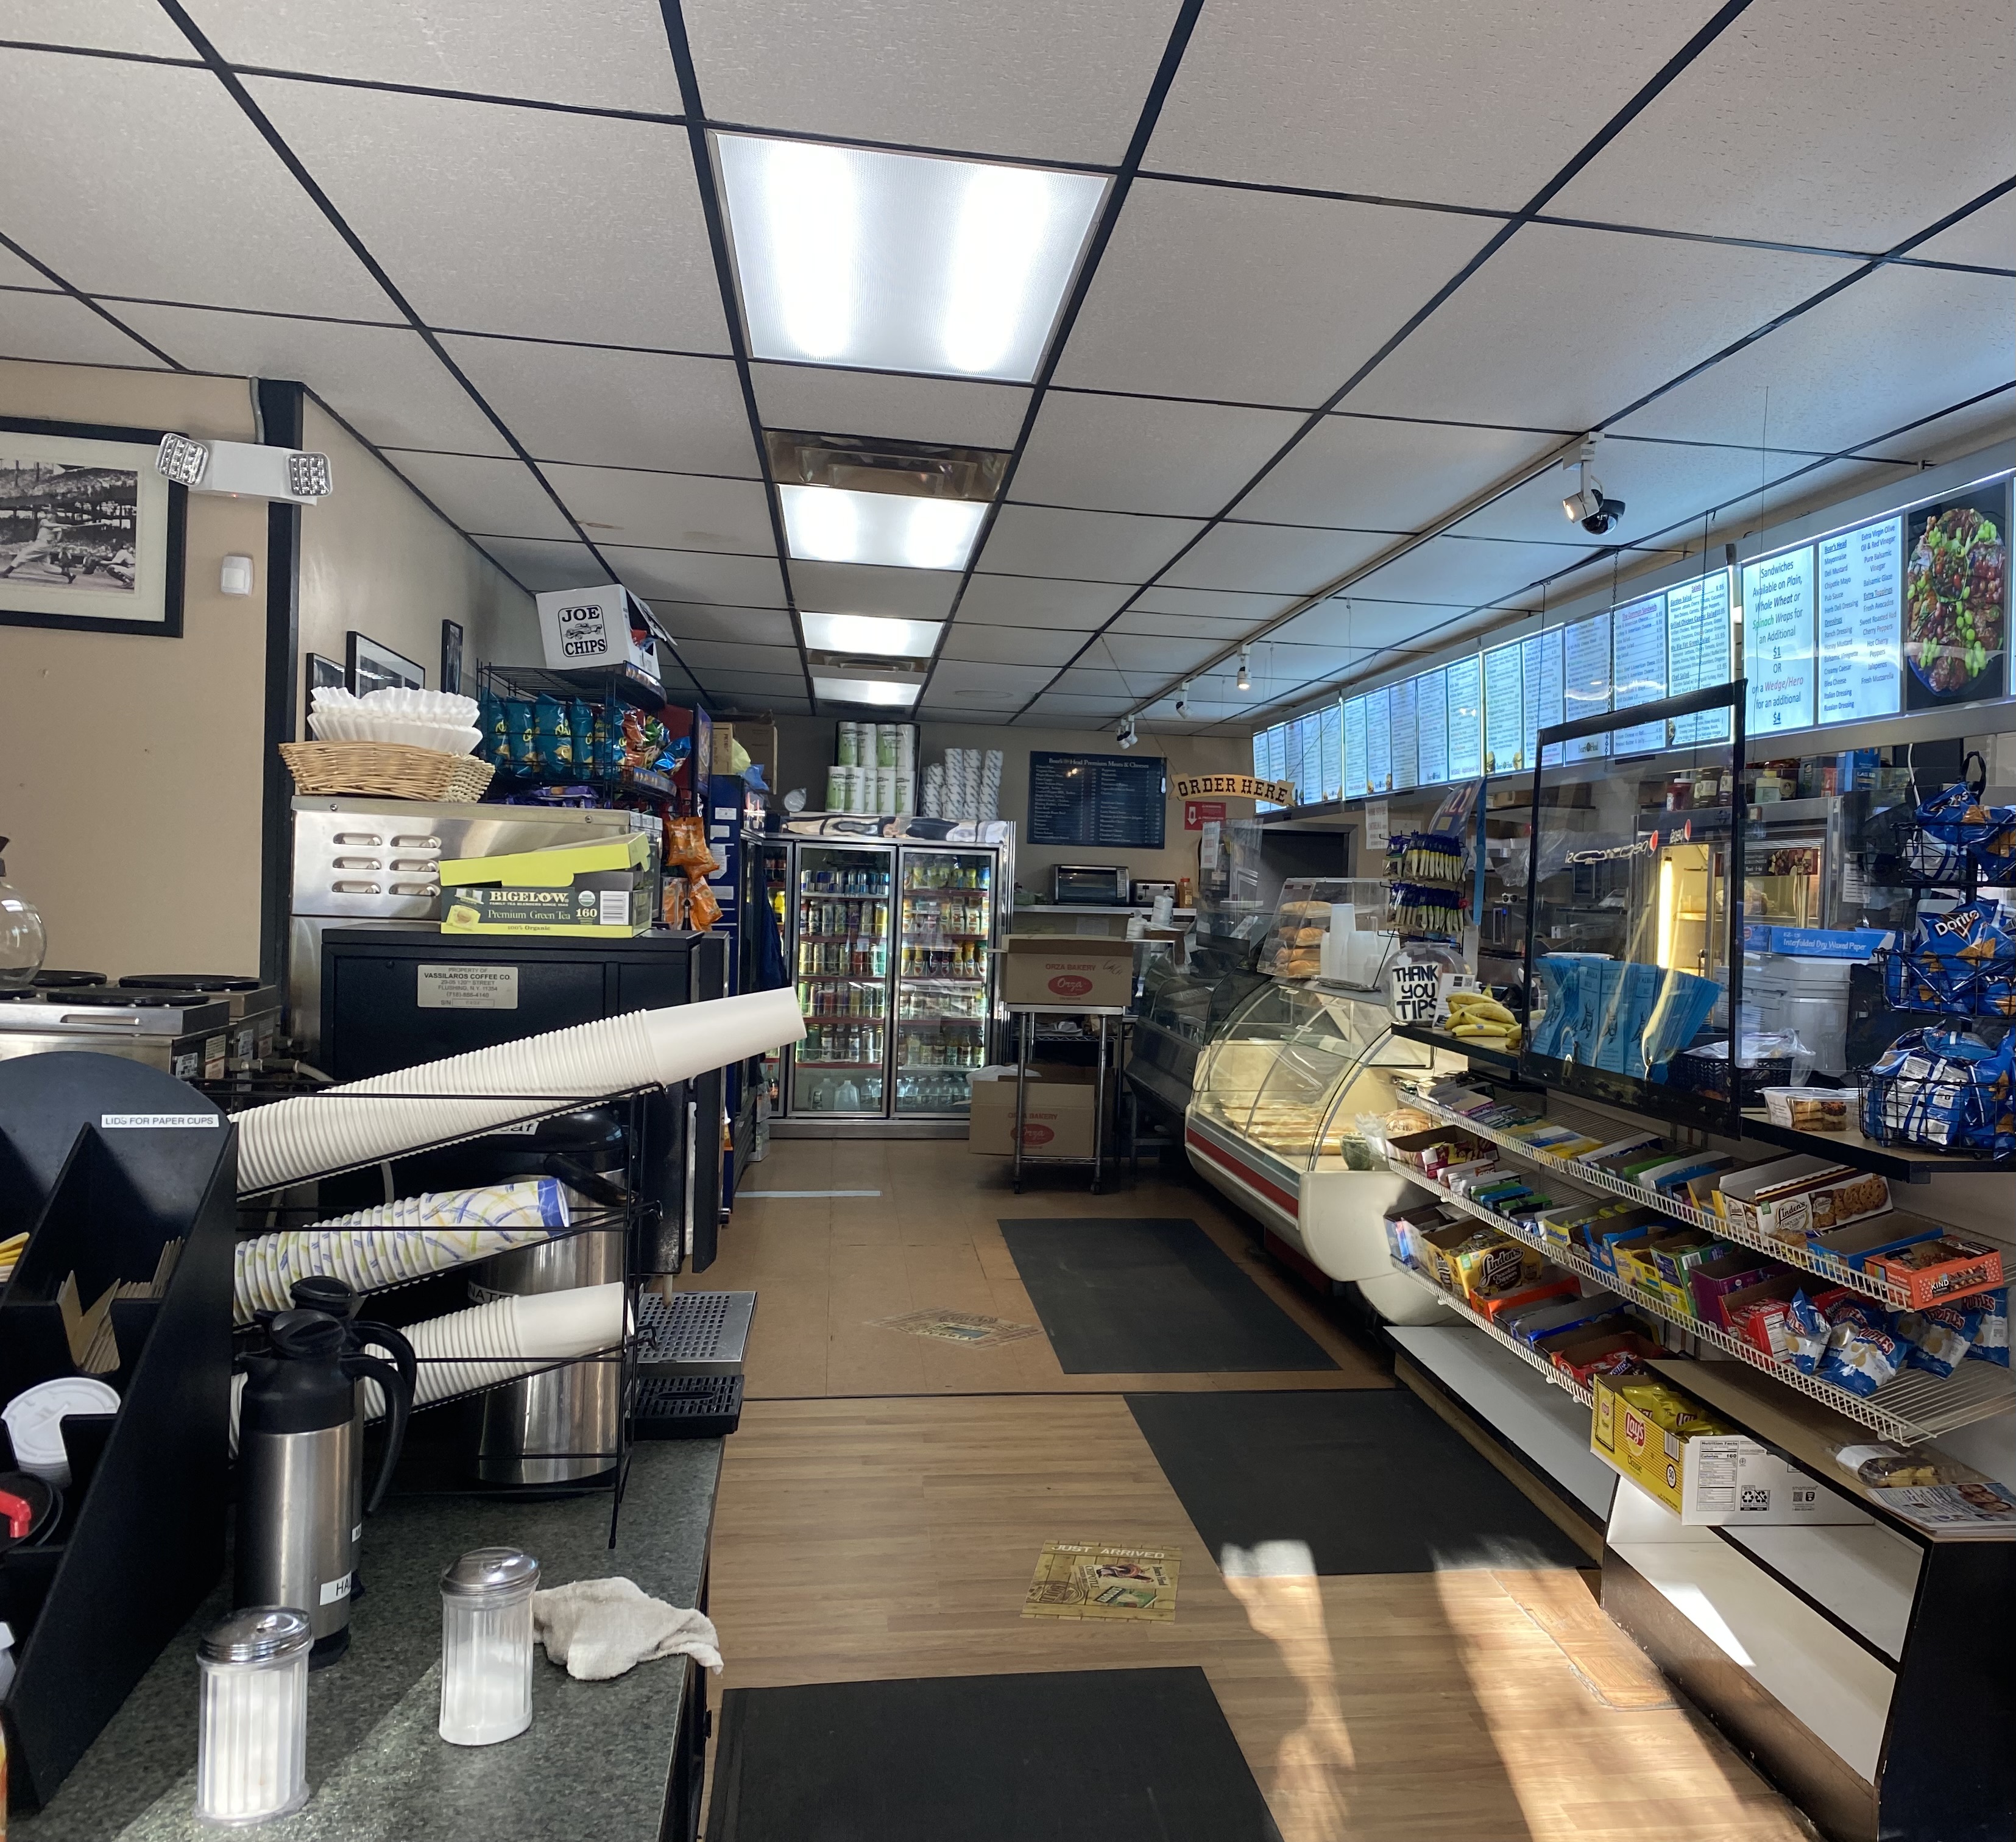 Busy Deli for sale in NY